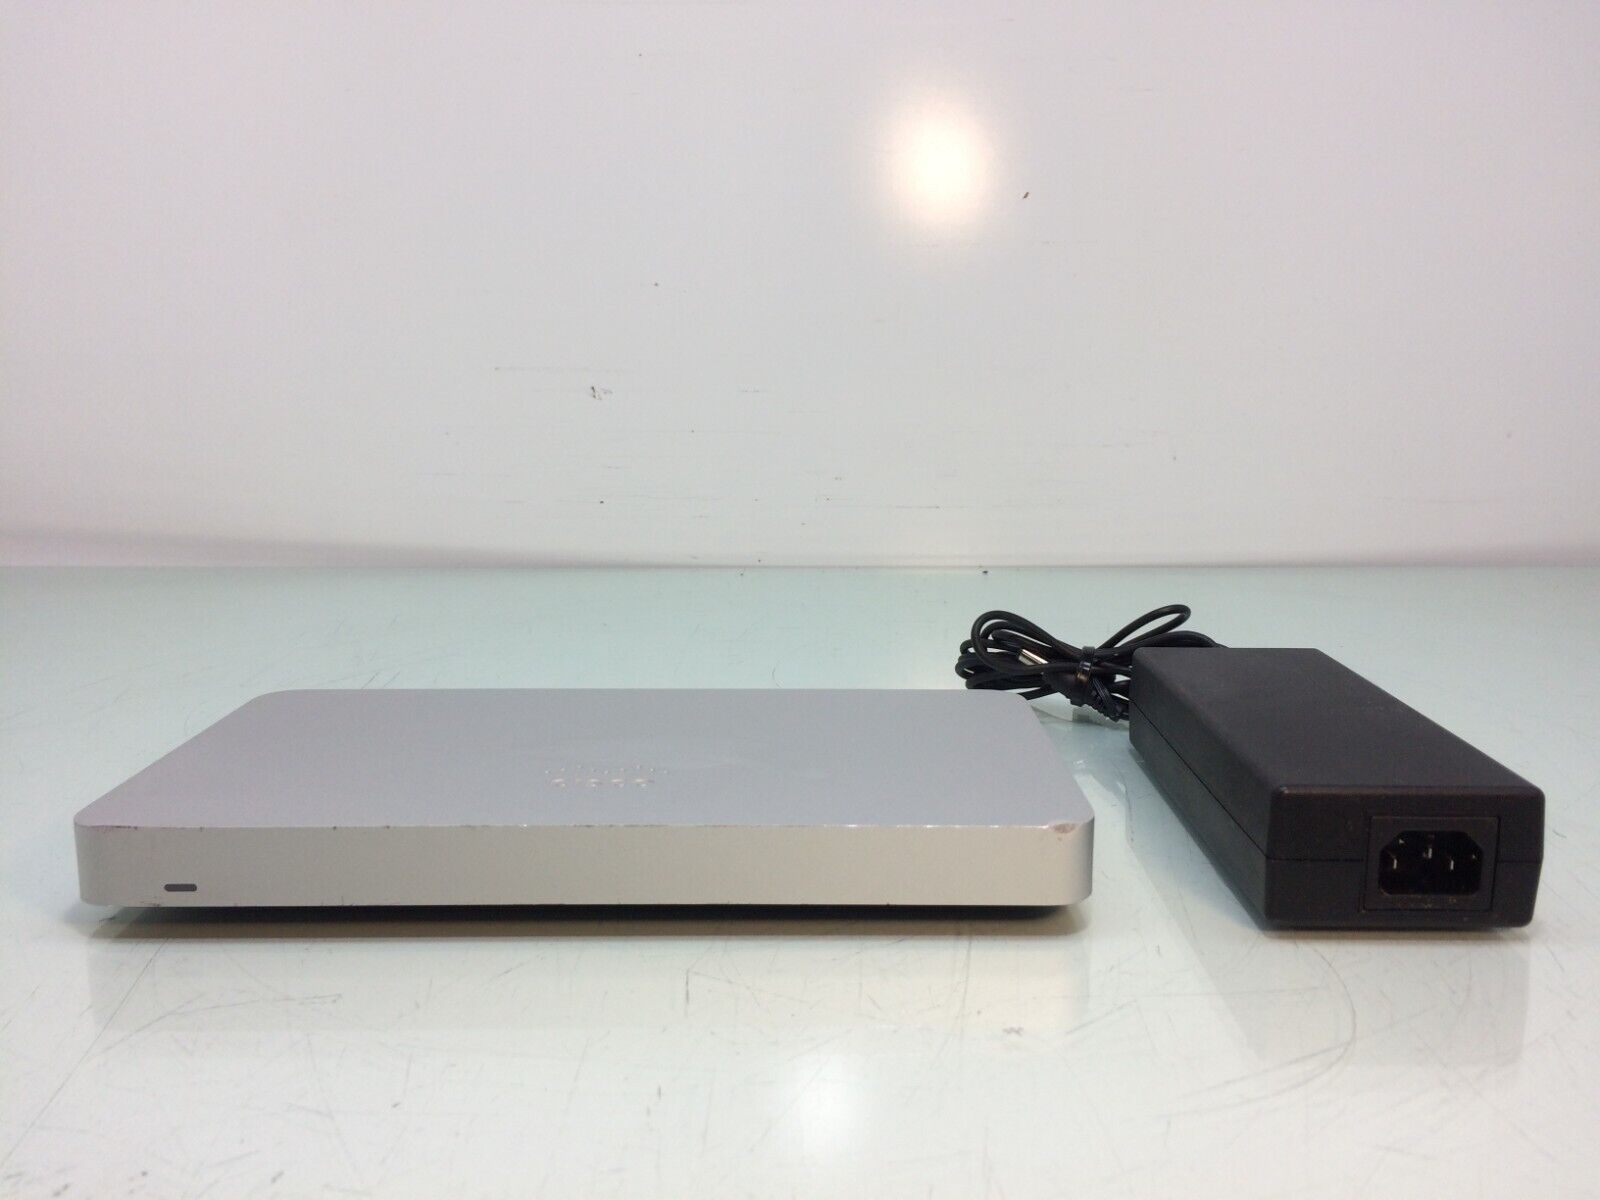 Cisco Meraki MX65-HW Security Appliance with Power Adapter - Unclaimed *QTY*